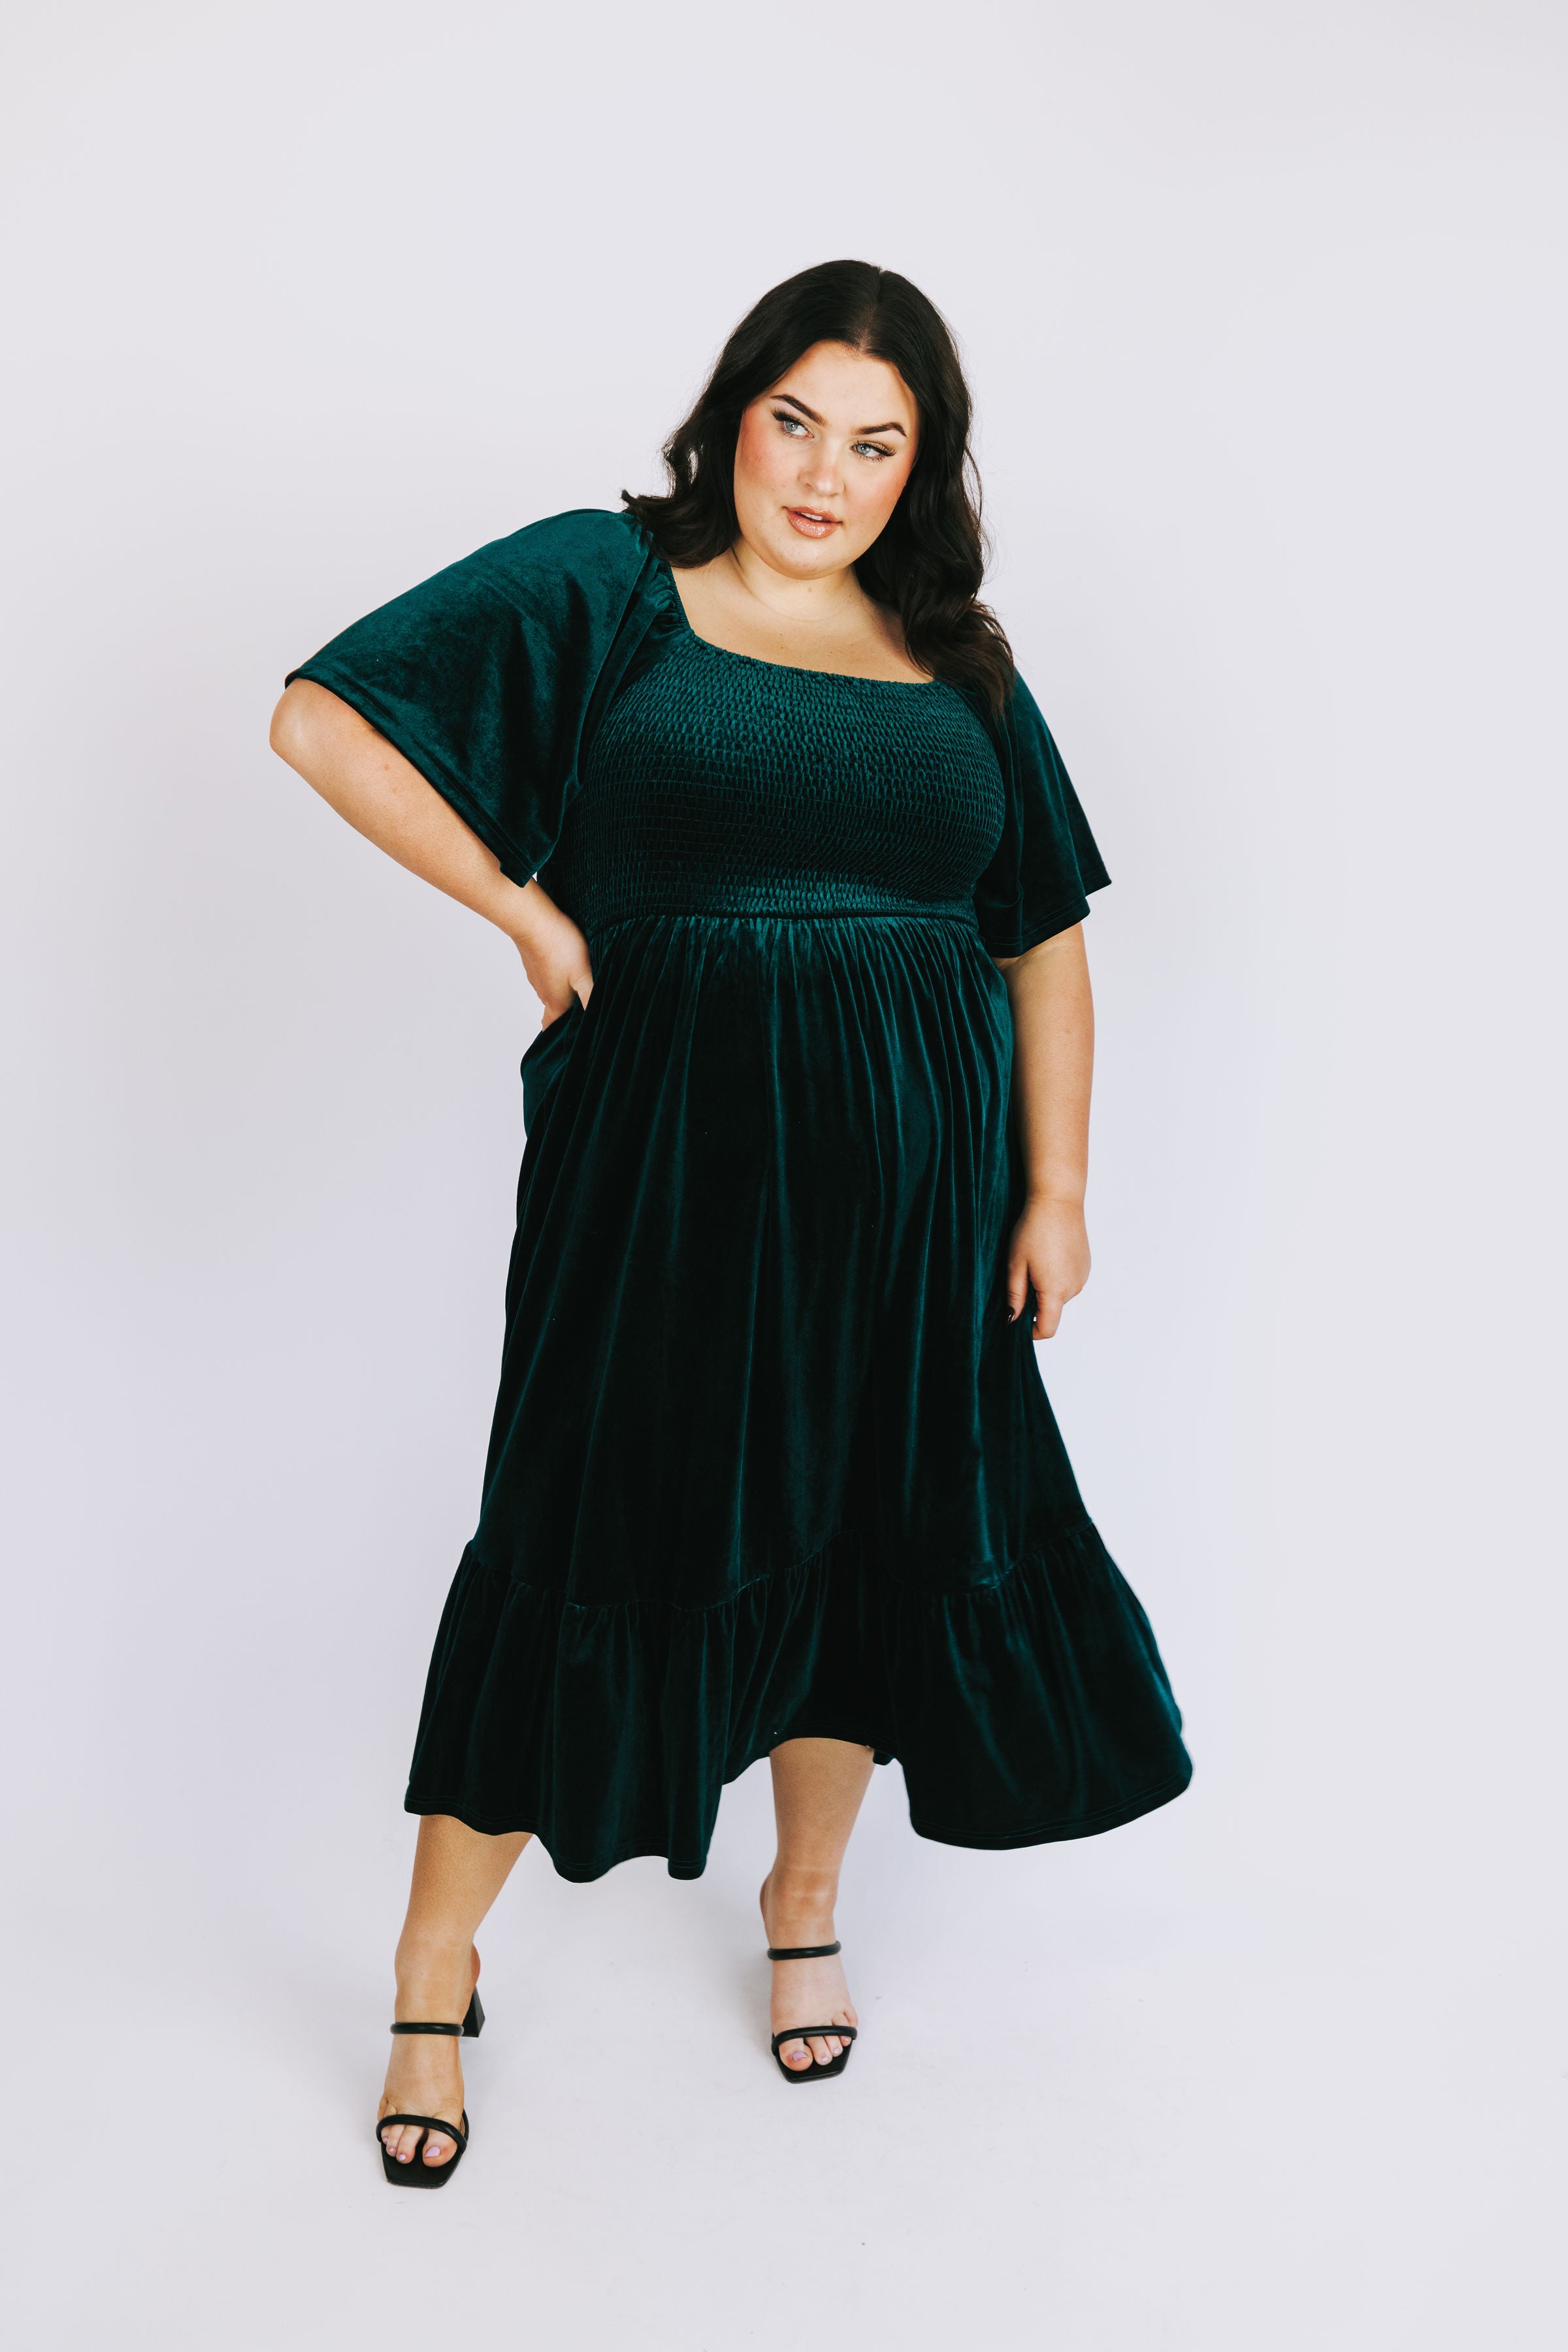 PLUS SIZE - Searching For Dress